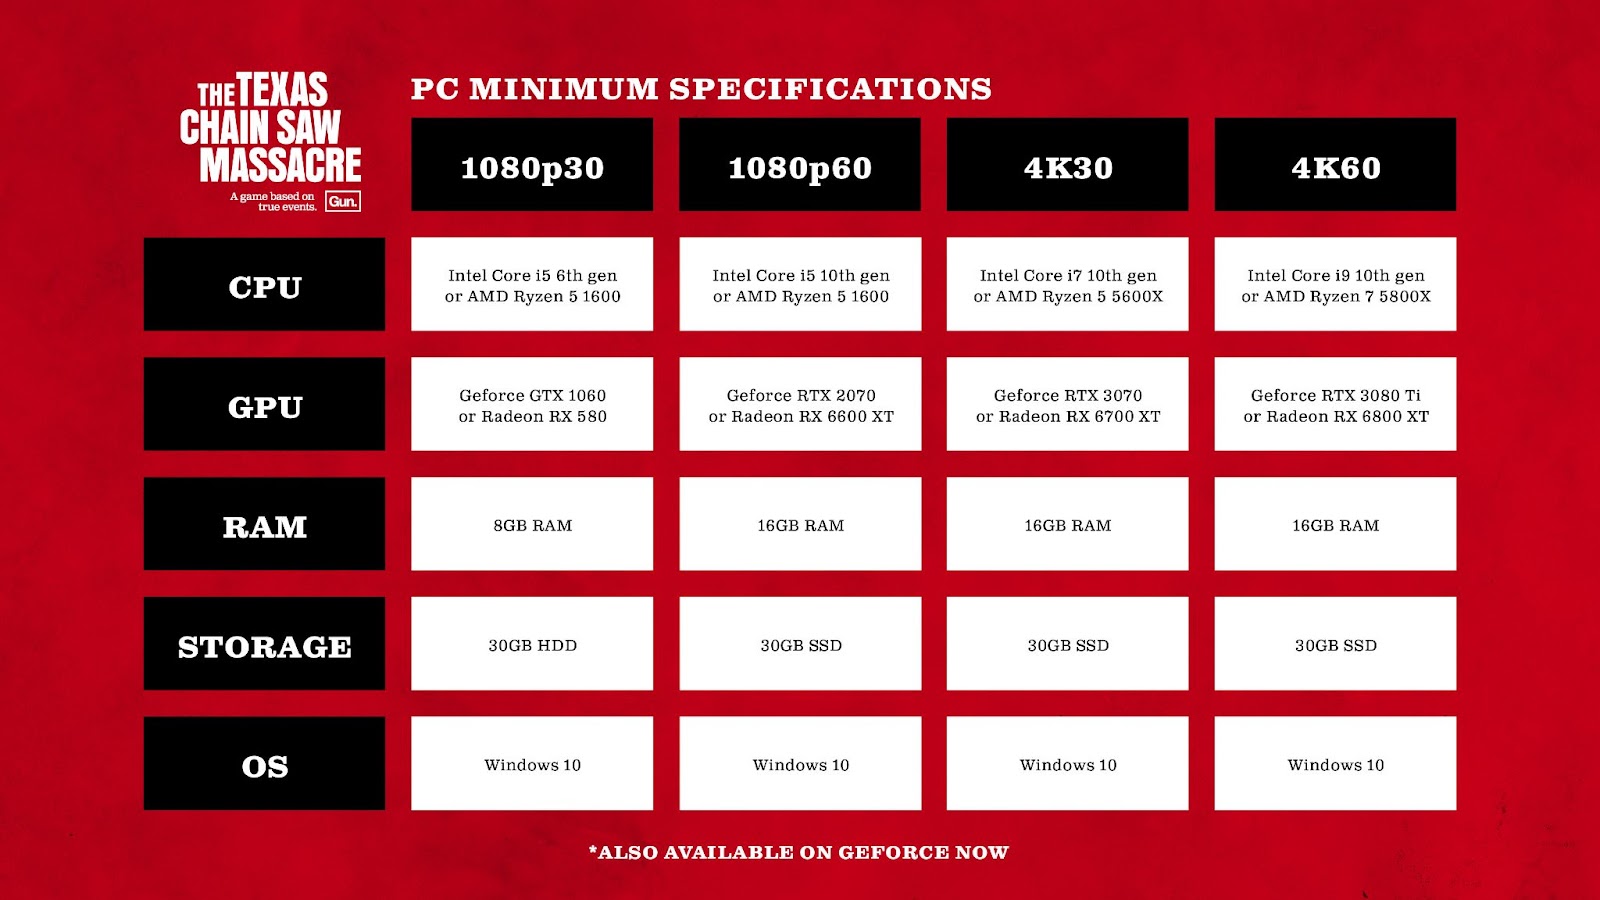 PC Minimum System Requirements to reach 1080p resolution at 30 FPS require the following: Intel Core i5 6th Gen or AMD Ryzen 5 1600 CPU, Geforce GTX 1060 or Radeon RX 580 GPU, 8GB RAM.

PC Requirements to reach 1080p 60 FPS require an Intel Core i5 10th Gen or AMD Ryzen 5 1600 CPU, Geforce GTX 2070 or Radeon RX 6600 XT GPU, 16GB RAM, and 30GB SSD.

PC Requirements to reach 4k30 FPS require an Intel Core i7 7th Gen or AMD Ryzen 5 5600X CPU, Geforce GTX 2070 or Radeon RX 6600 XT GPU, 16GB RAM, and 30GB SSD.

PC Requirements to reach 4k60 FPS require an Intel Core i9 10th Gen or AMD Ryzen 7 5800X CPU, Geforce GTX 3080 Ti or Radeon RX 6800 XT GPU, 16GB RAM, and 30GB SSD.